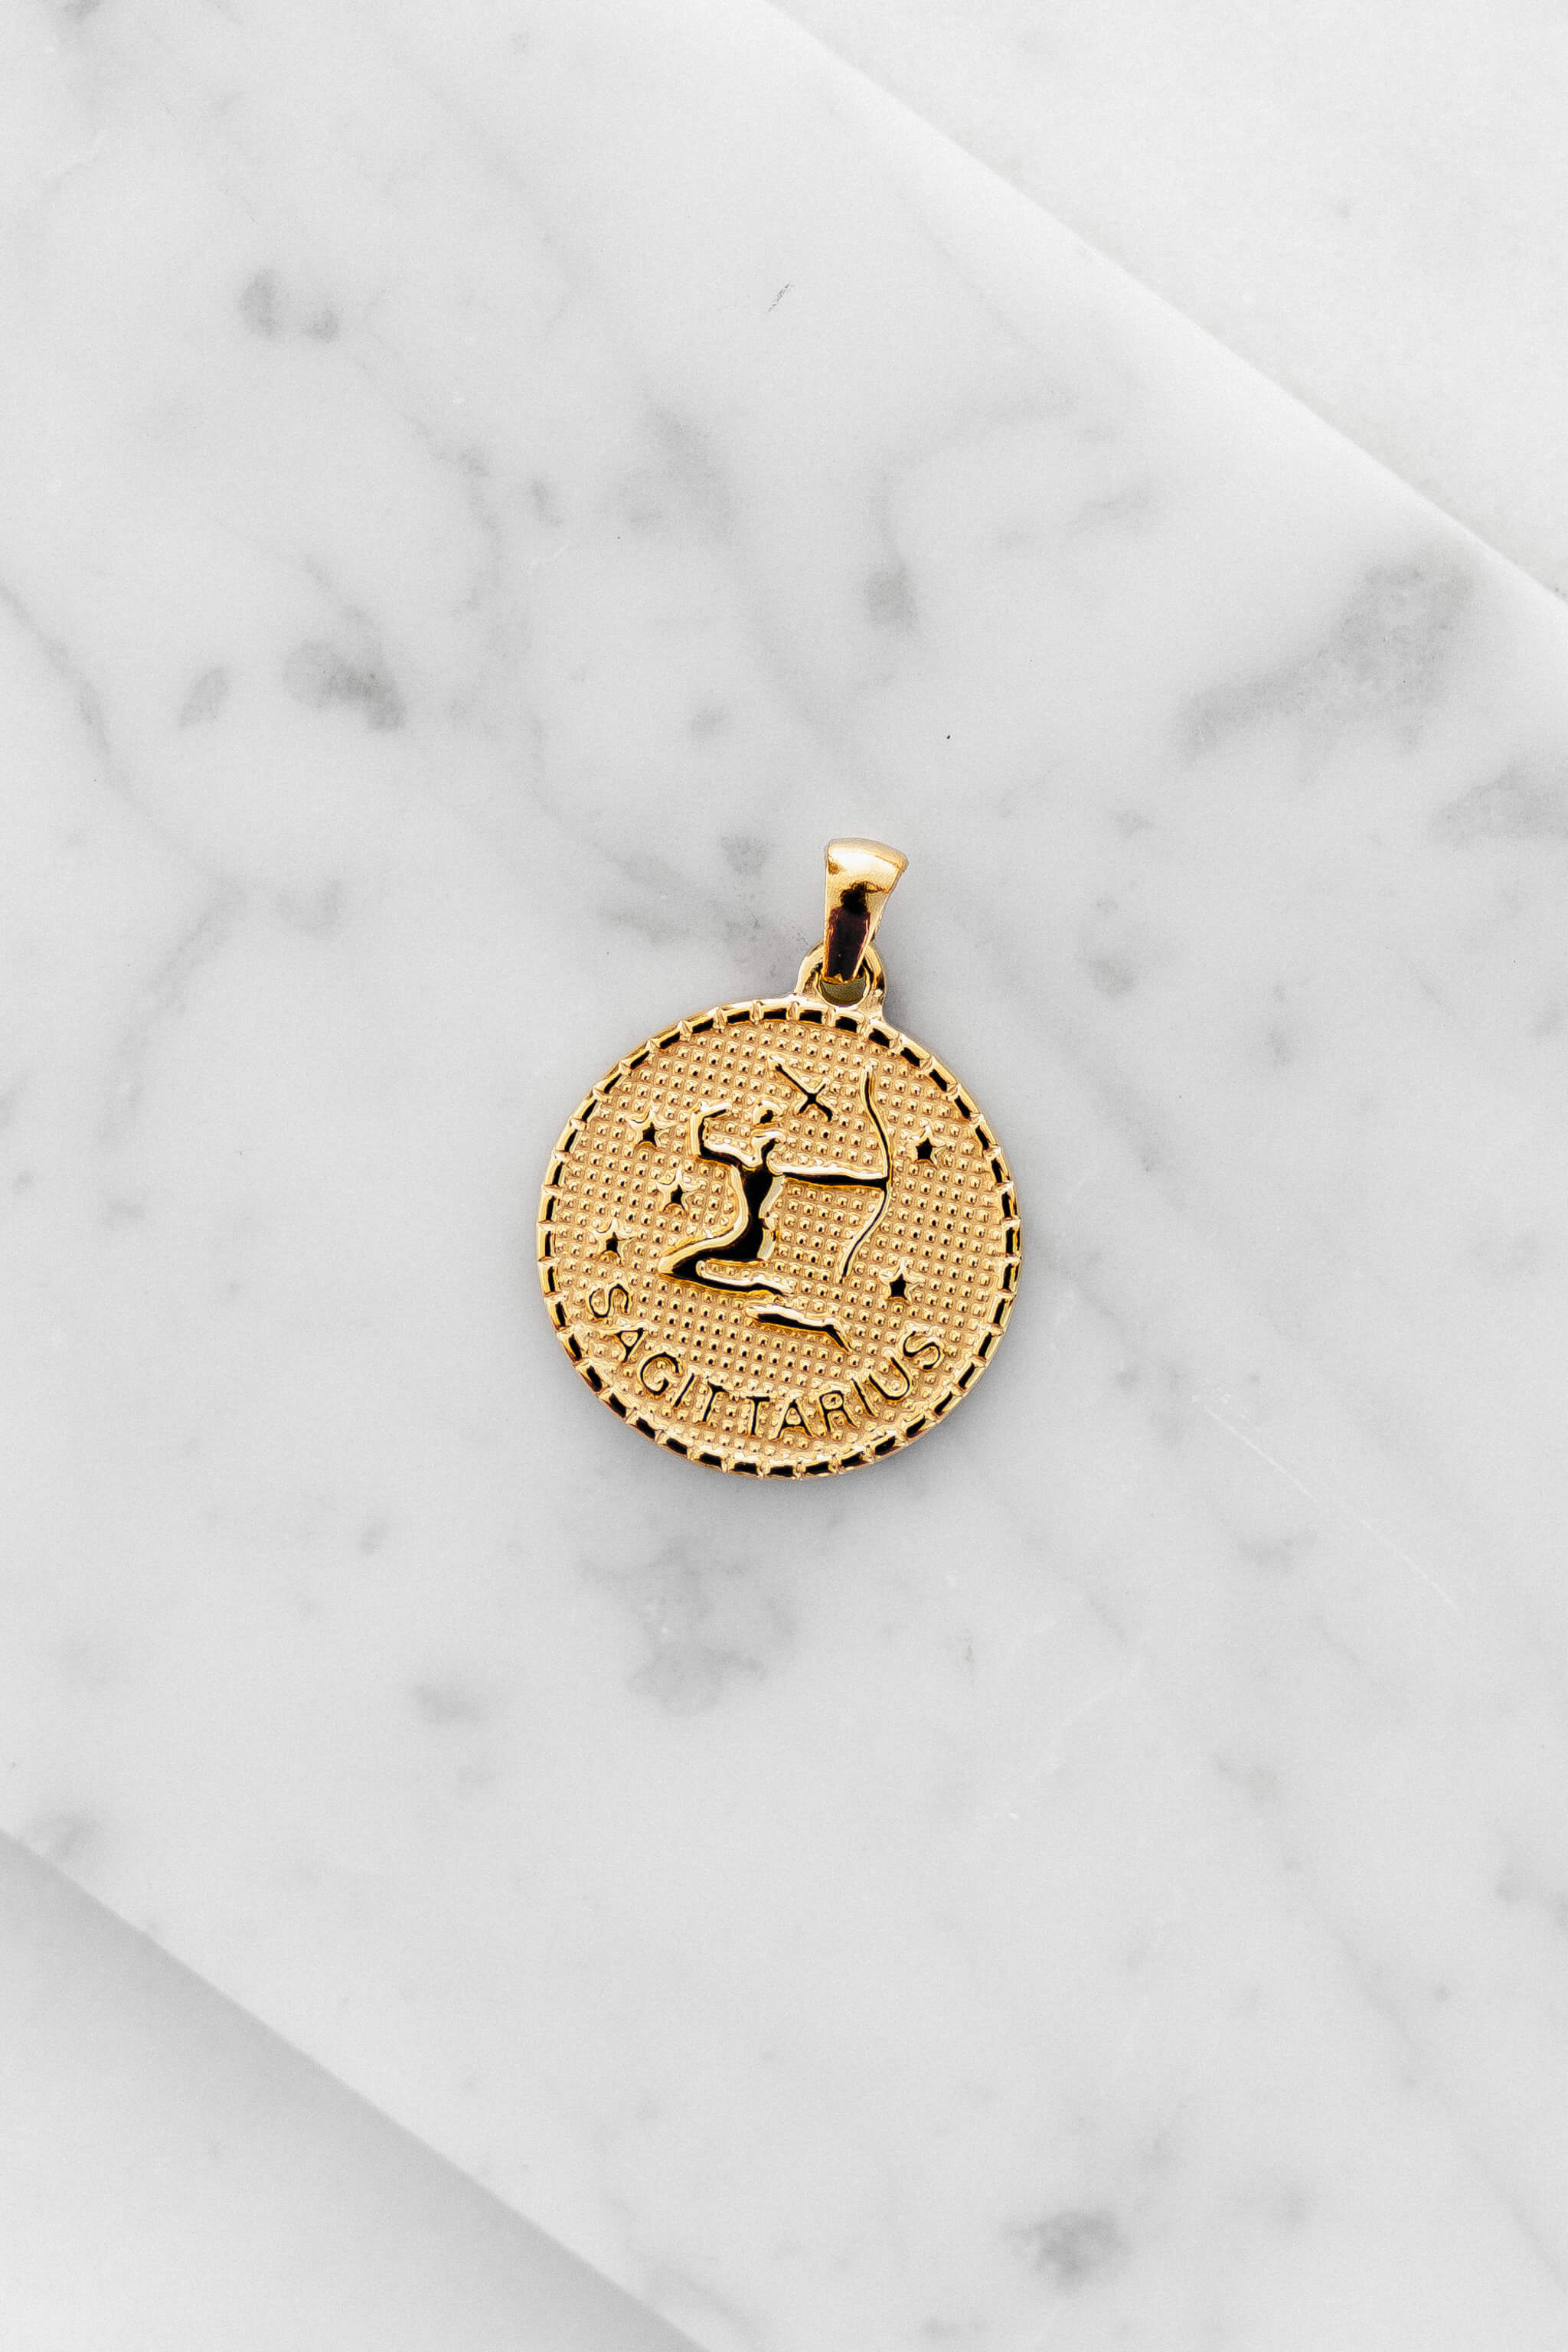 Sagittarius zodiac sign gold coin charm laying on a white marble